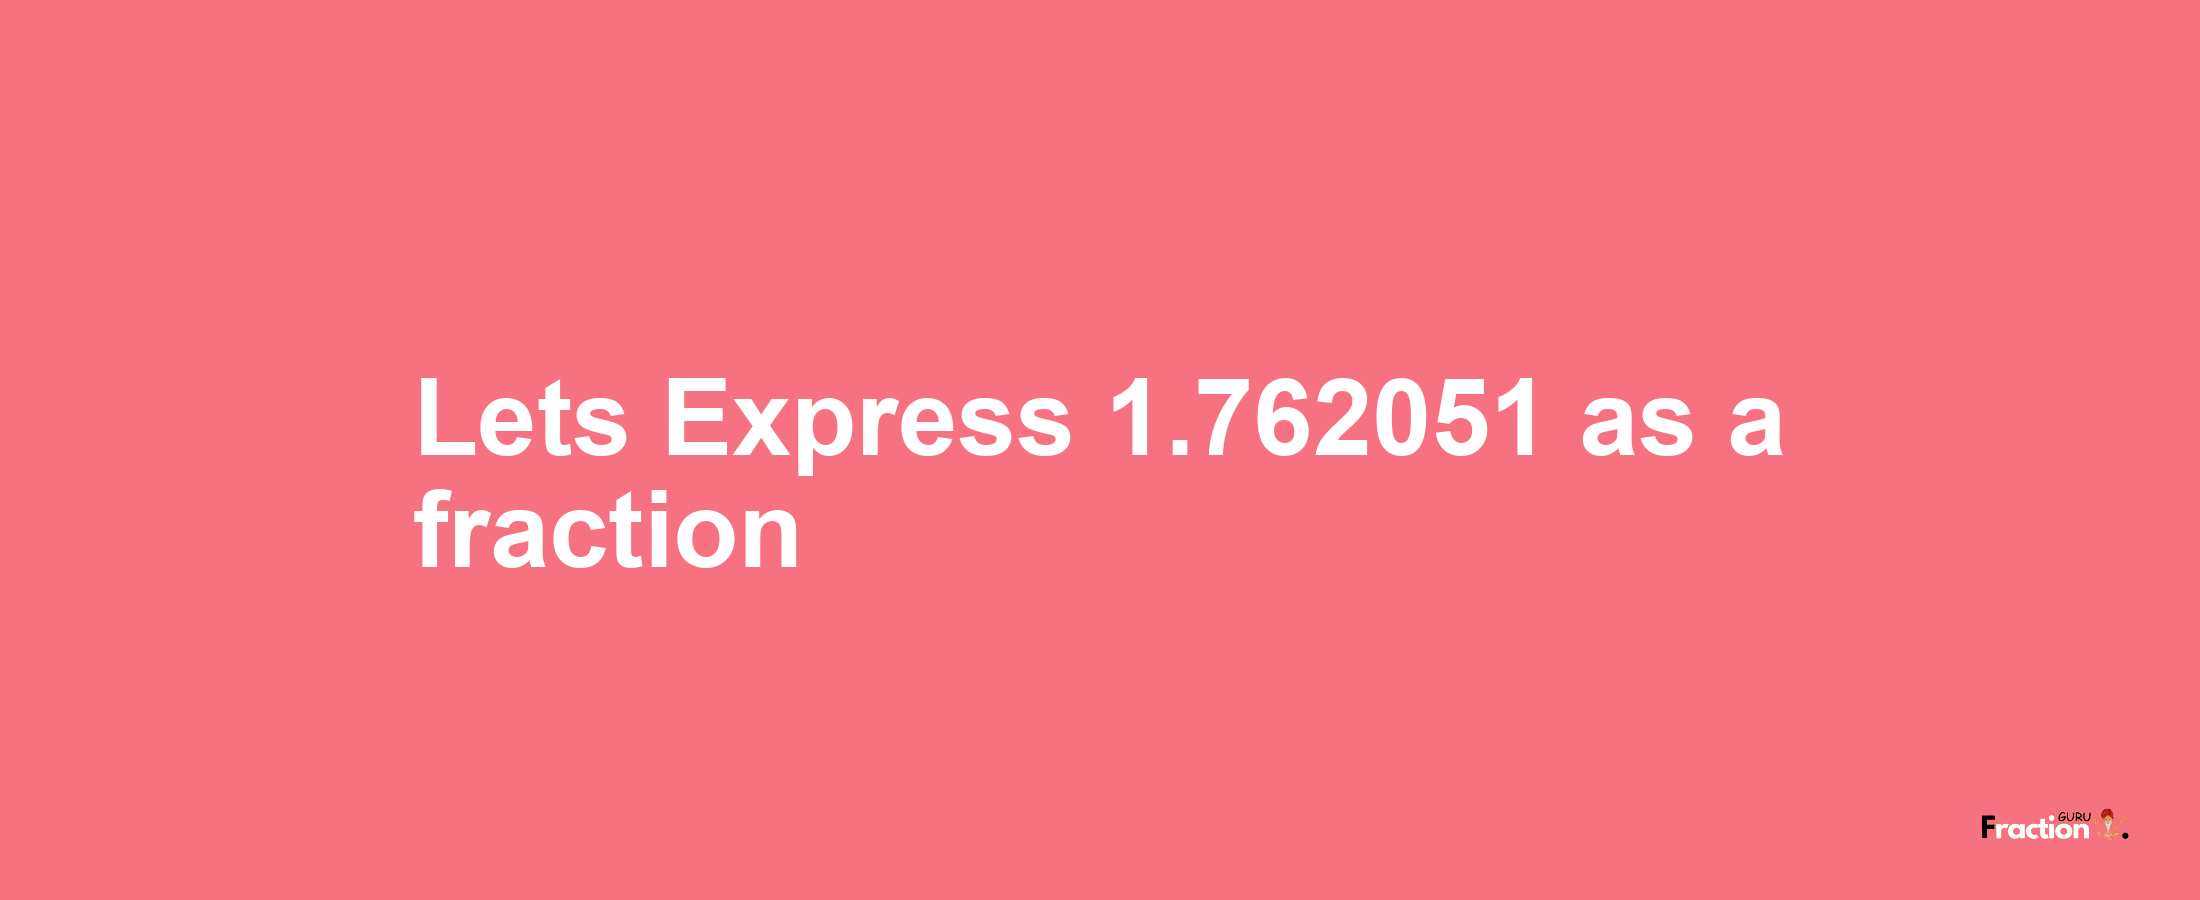 Lets Express 1.762051 as afraction